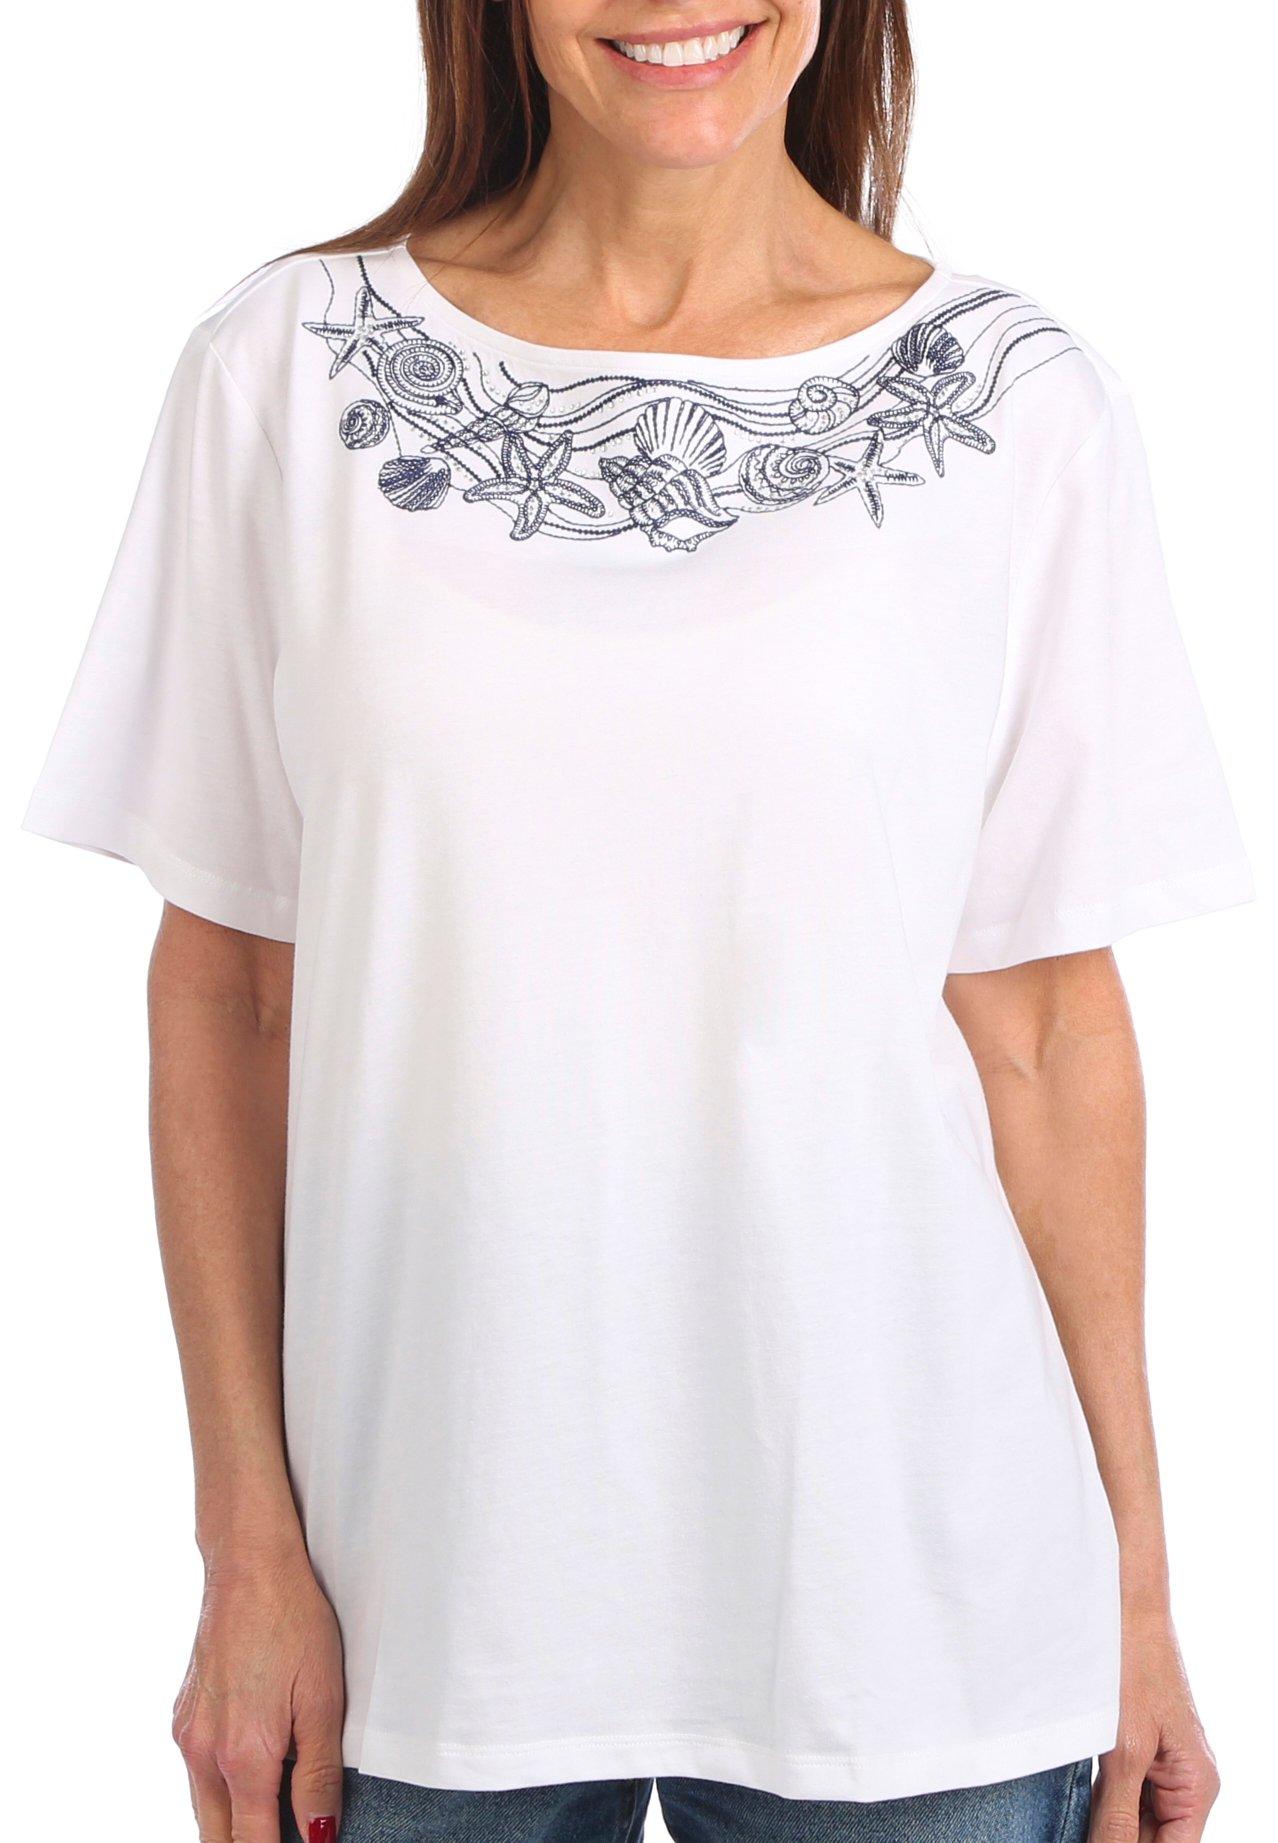 Coral Bay Womens Tropical Embellished Short Sleeve Tee